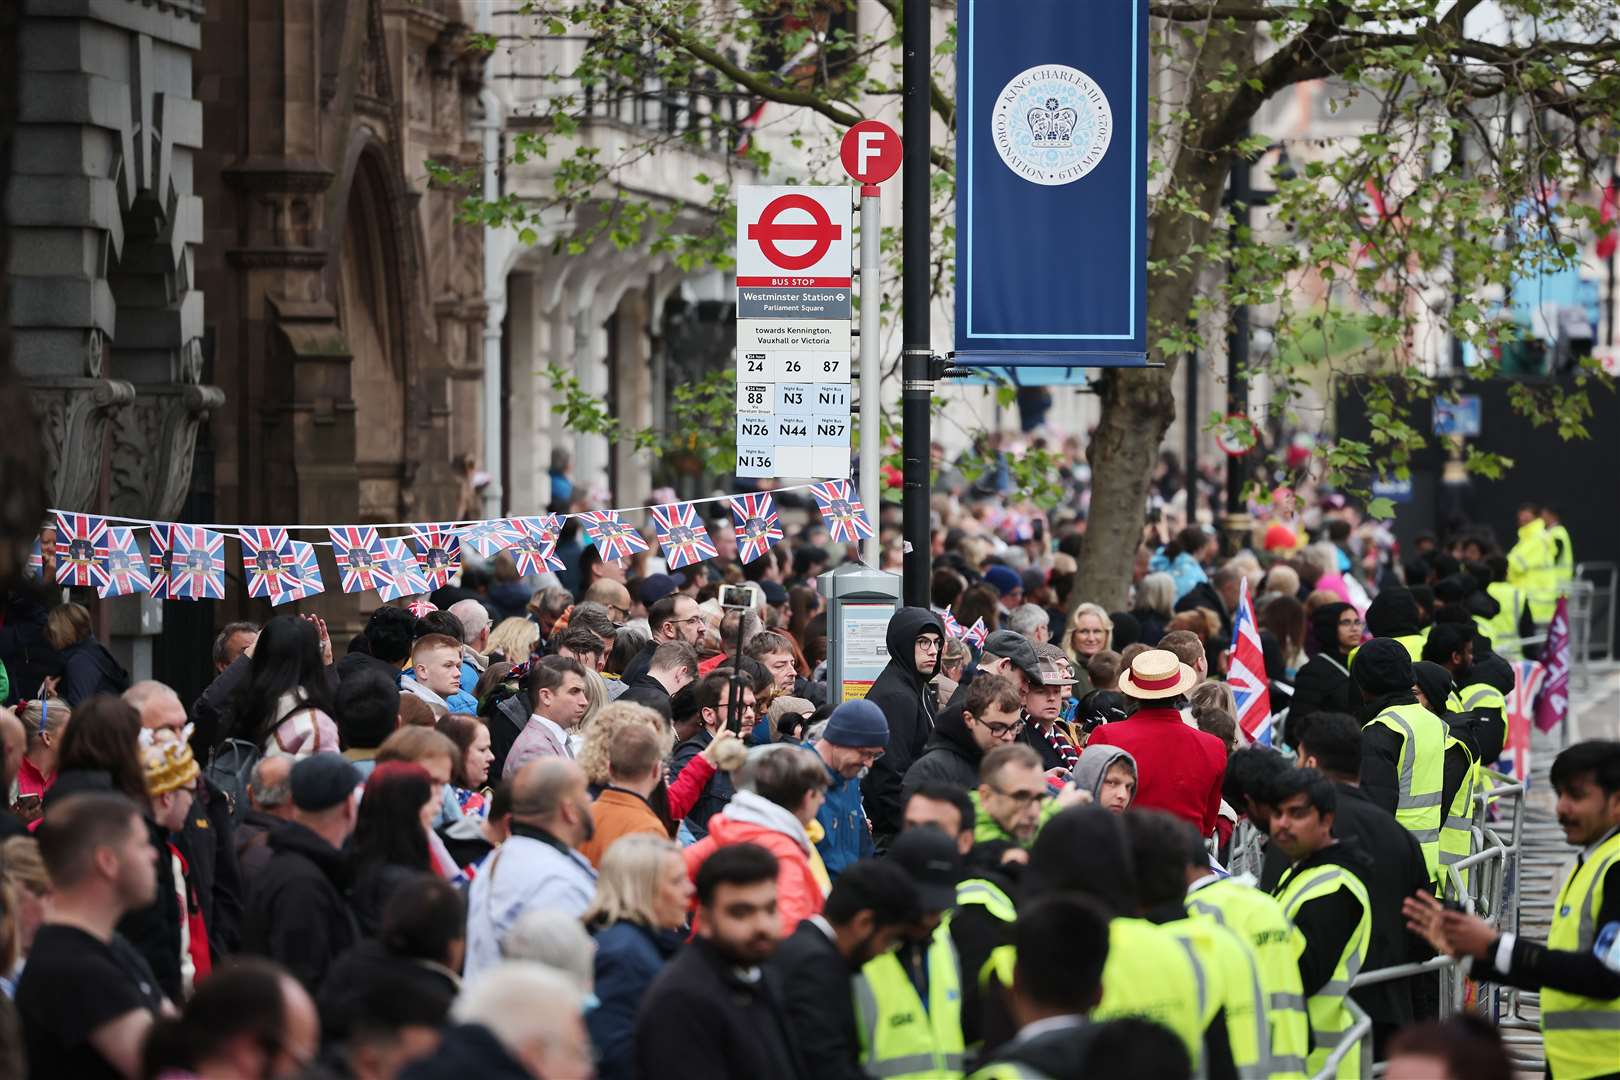 Crowds were already thick near Parliament Square before 8am (Rob Pinney/PA)